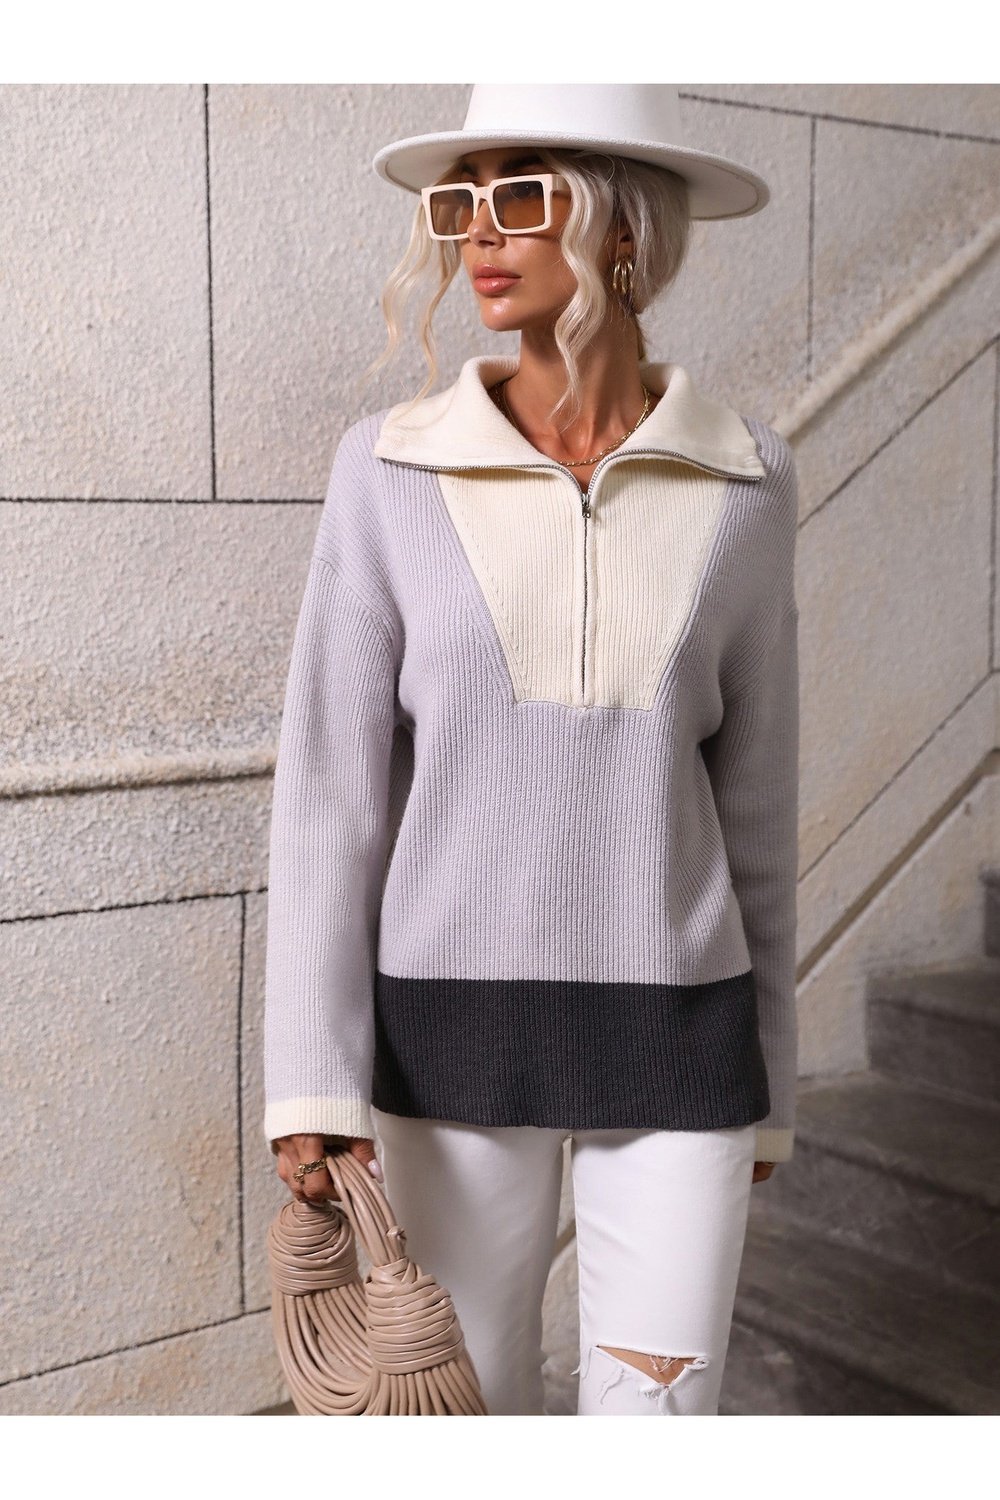 Color Block Half-Zip Dropped Shoulder Knit Pullover - Pullover Sweaters - FITGGINS